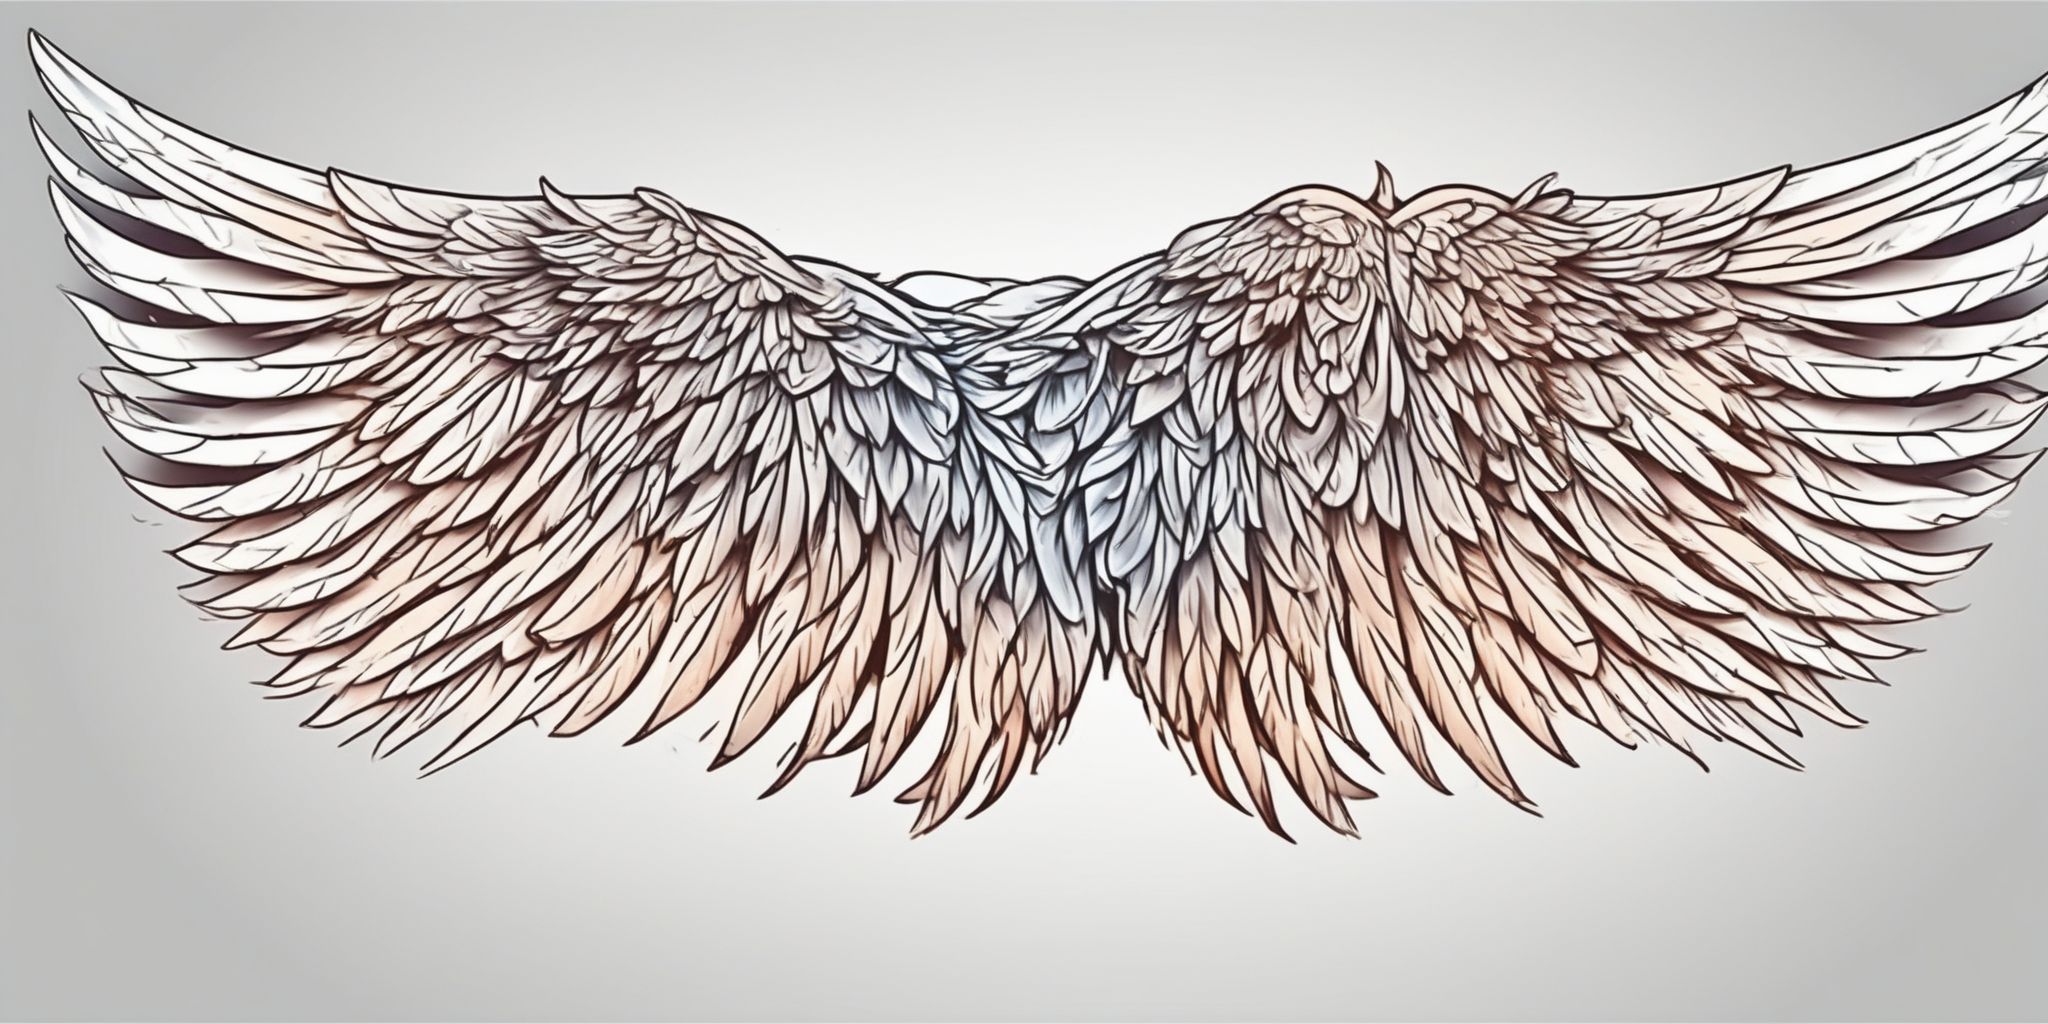 wings in illustration style with gradients and white background